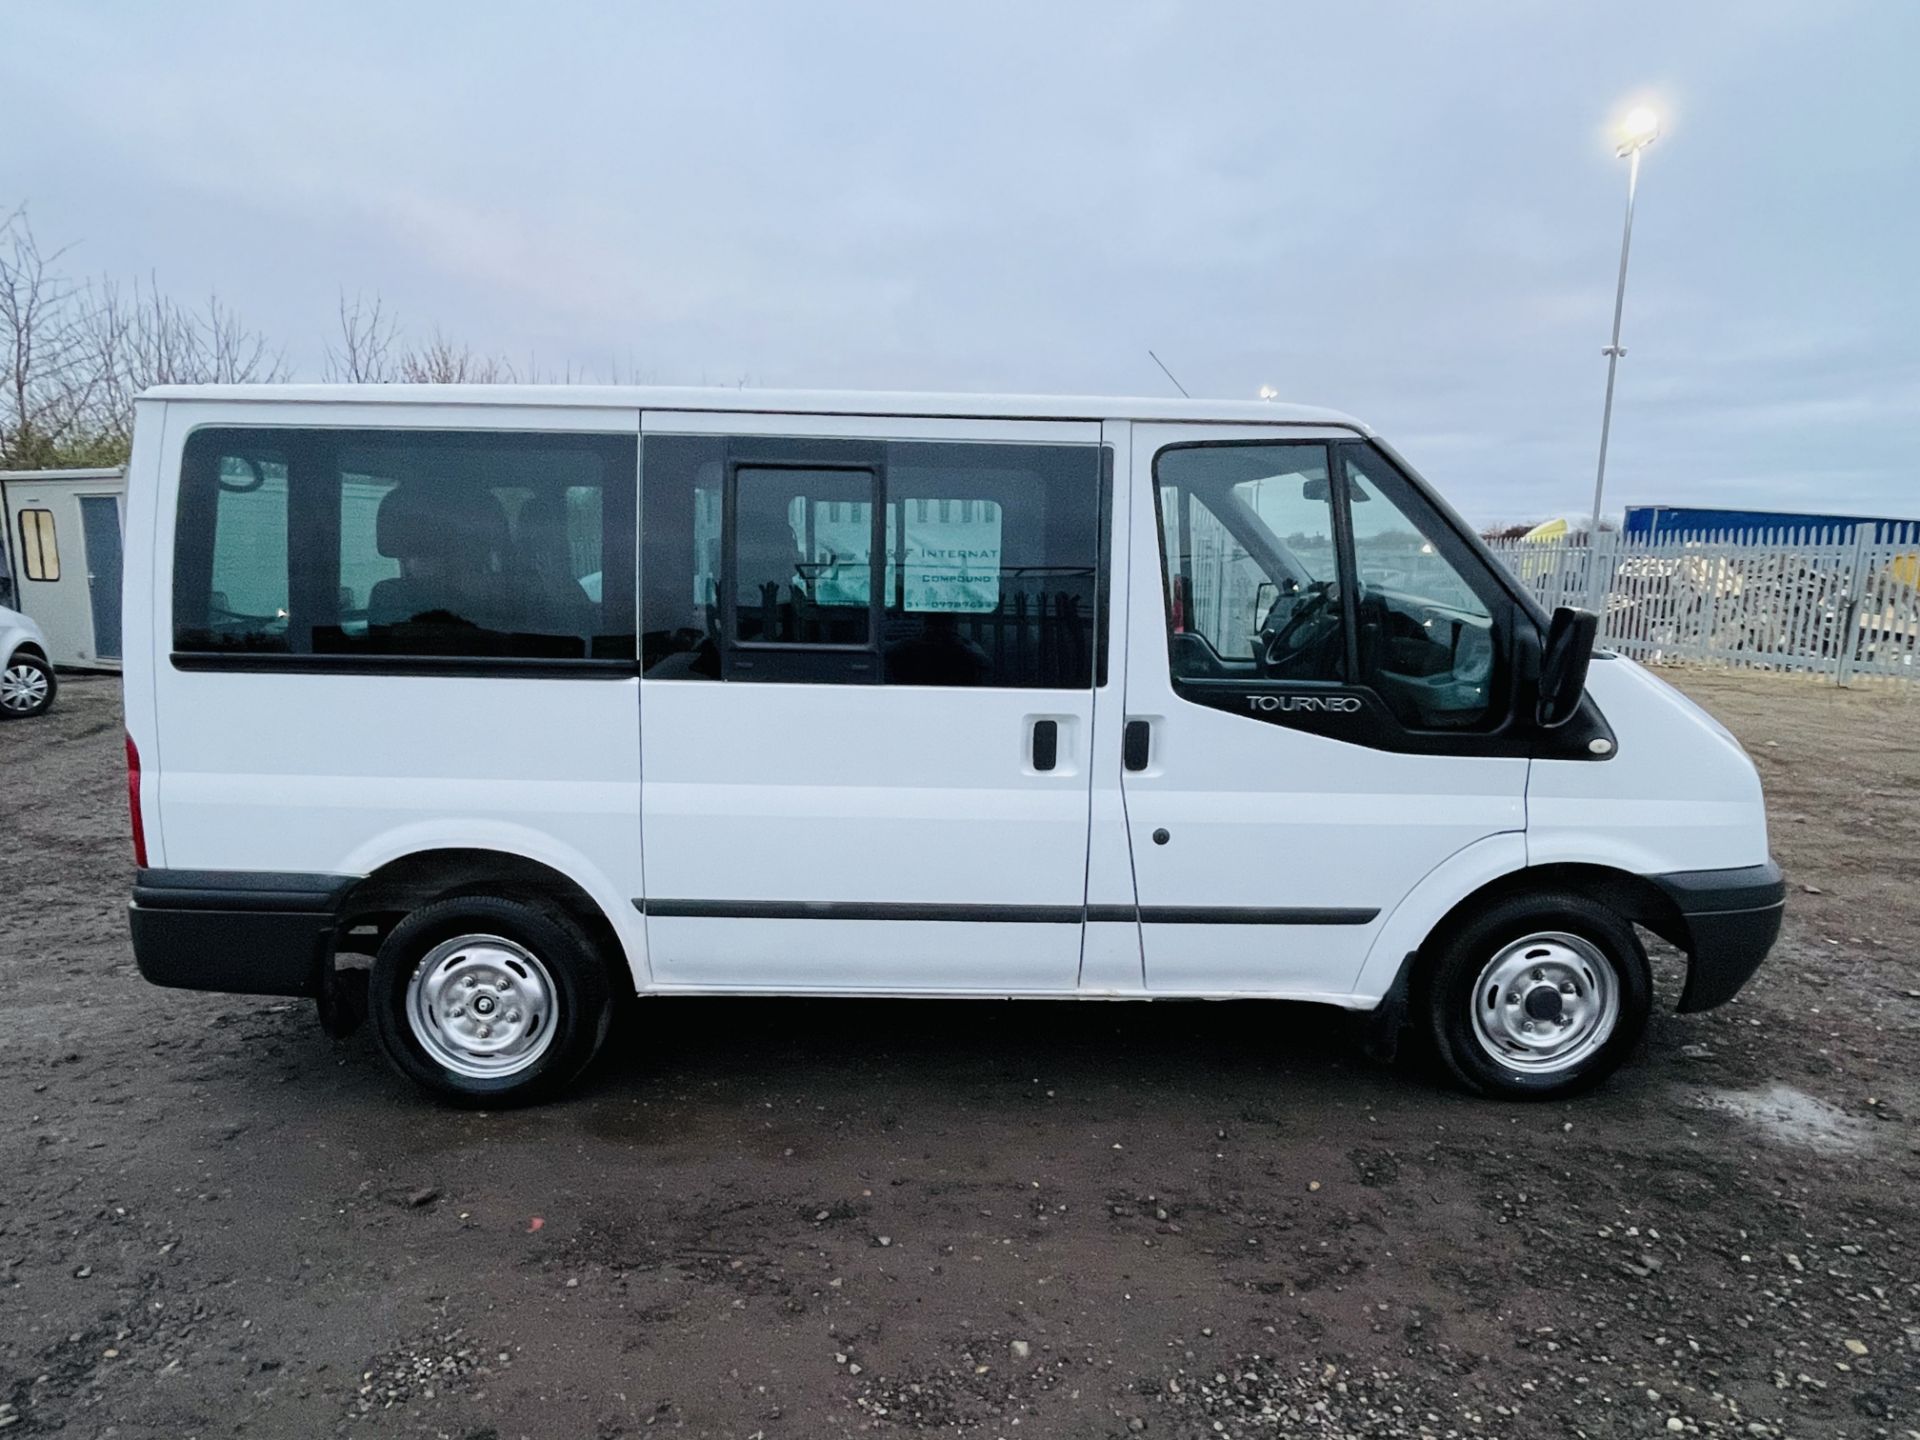 ** ON SALE ** Ford Transit Toureno 2.2 TDCI Trend 2013 '13 Reg' 9 seats - Air Con - Cruise Control** - Image 16 of 25